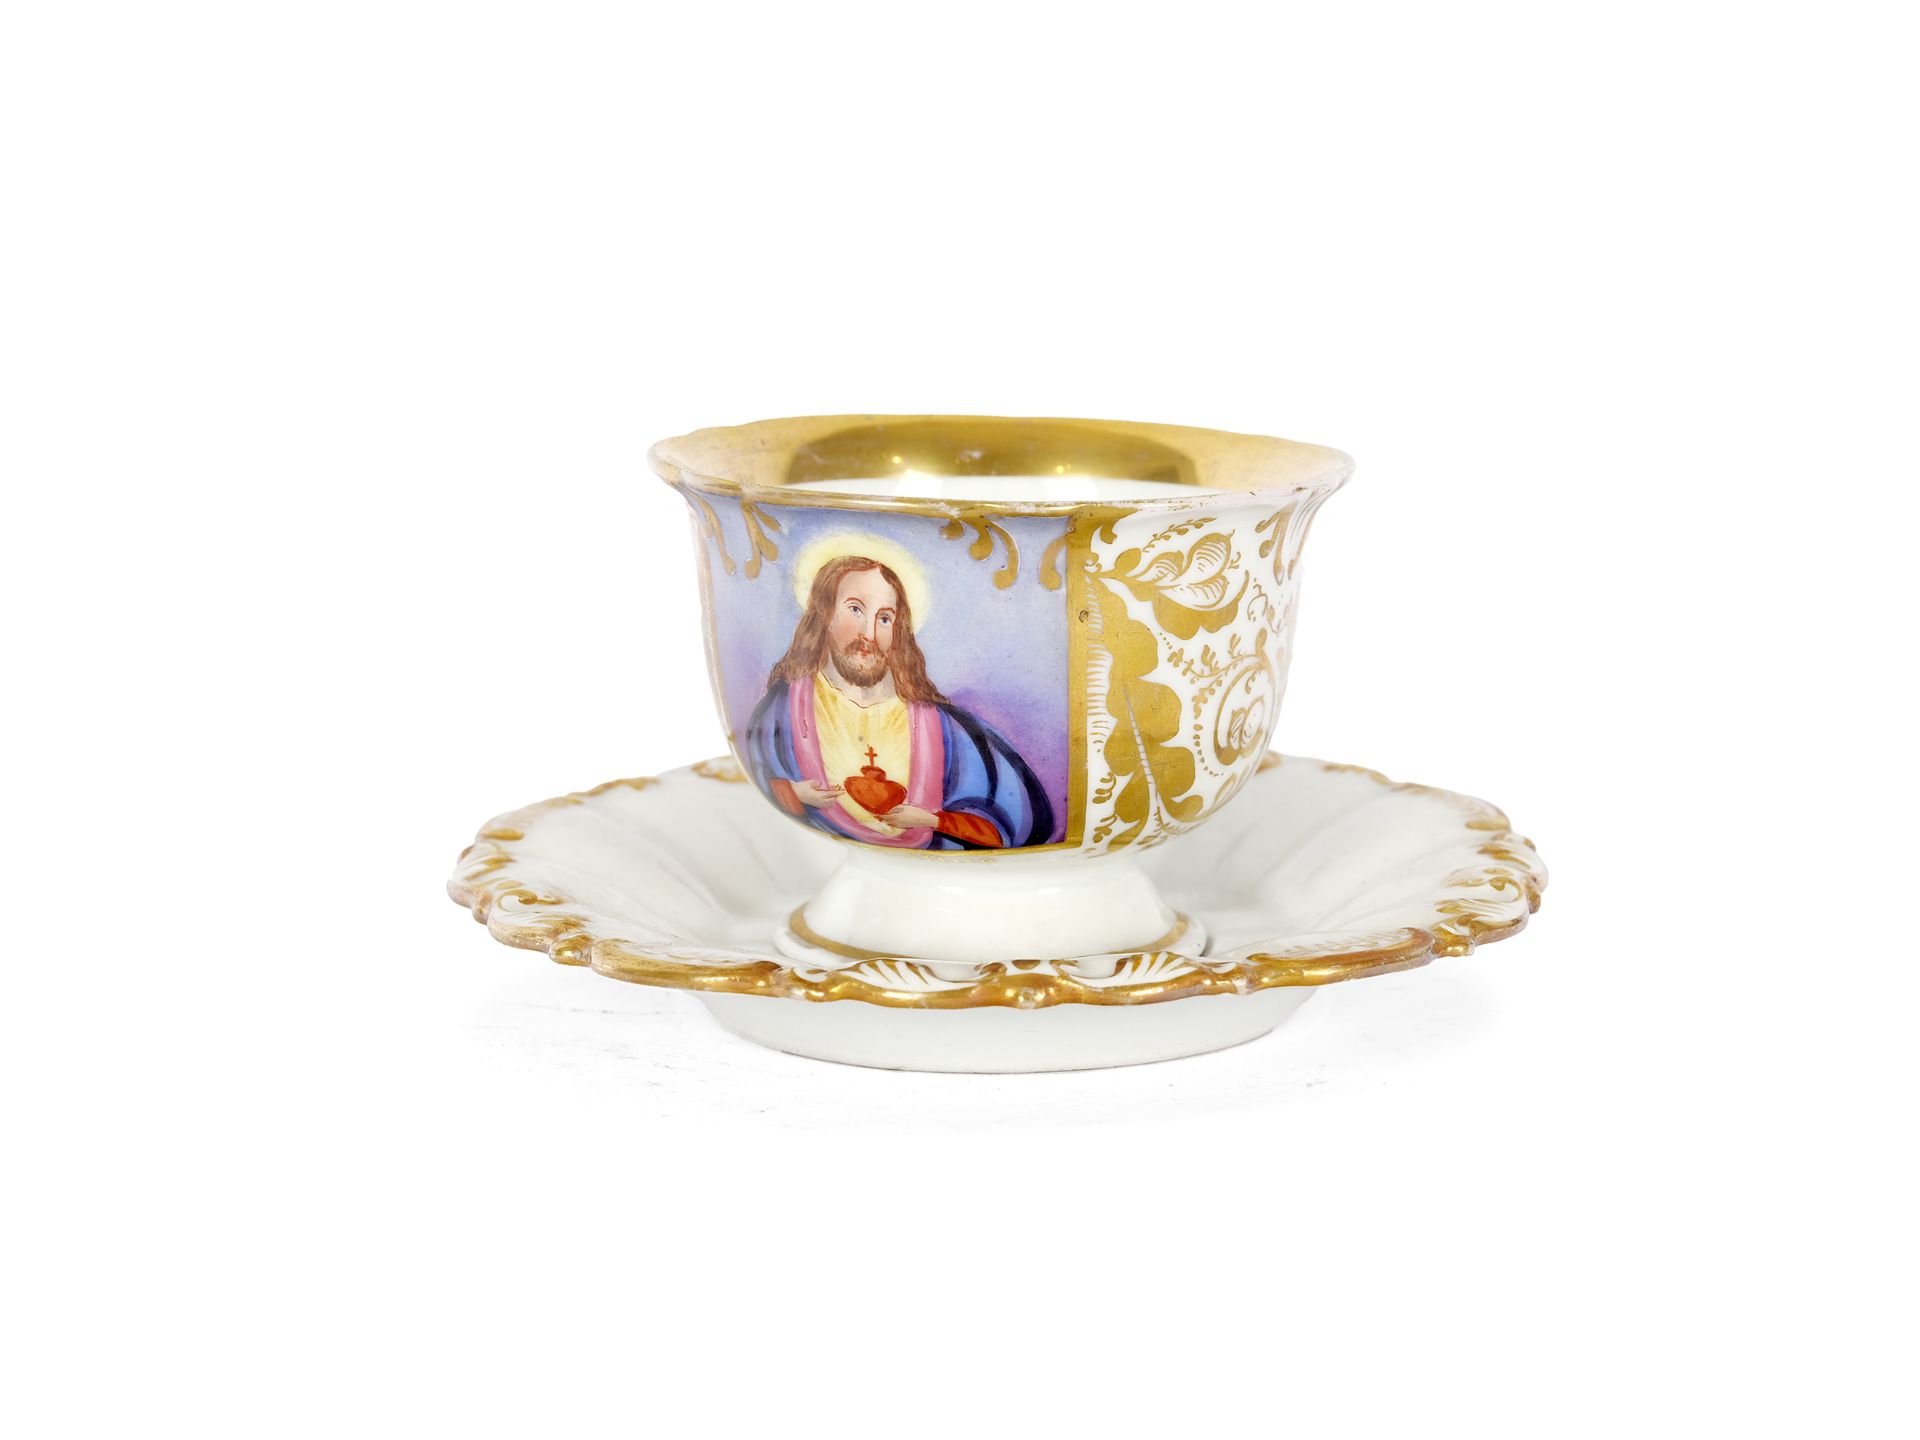 Coffee cup with saucer, with the heart of Jesus, Biedermeier, mid 19th century - Image 3 of 4